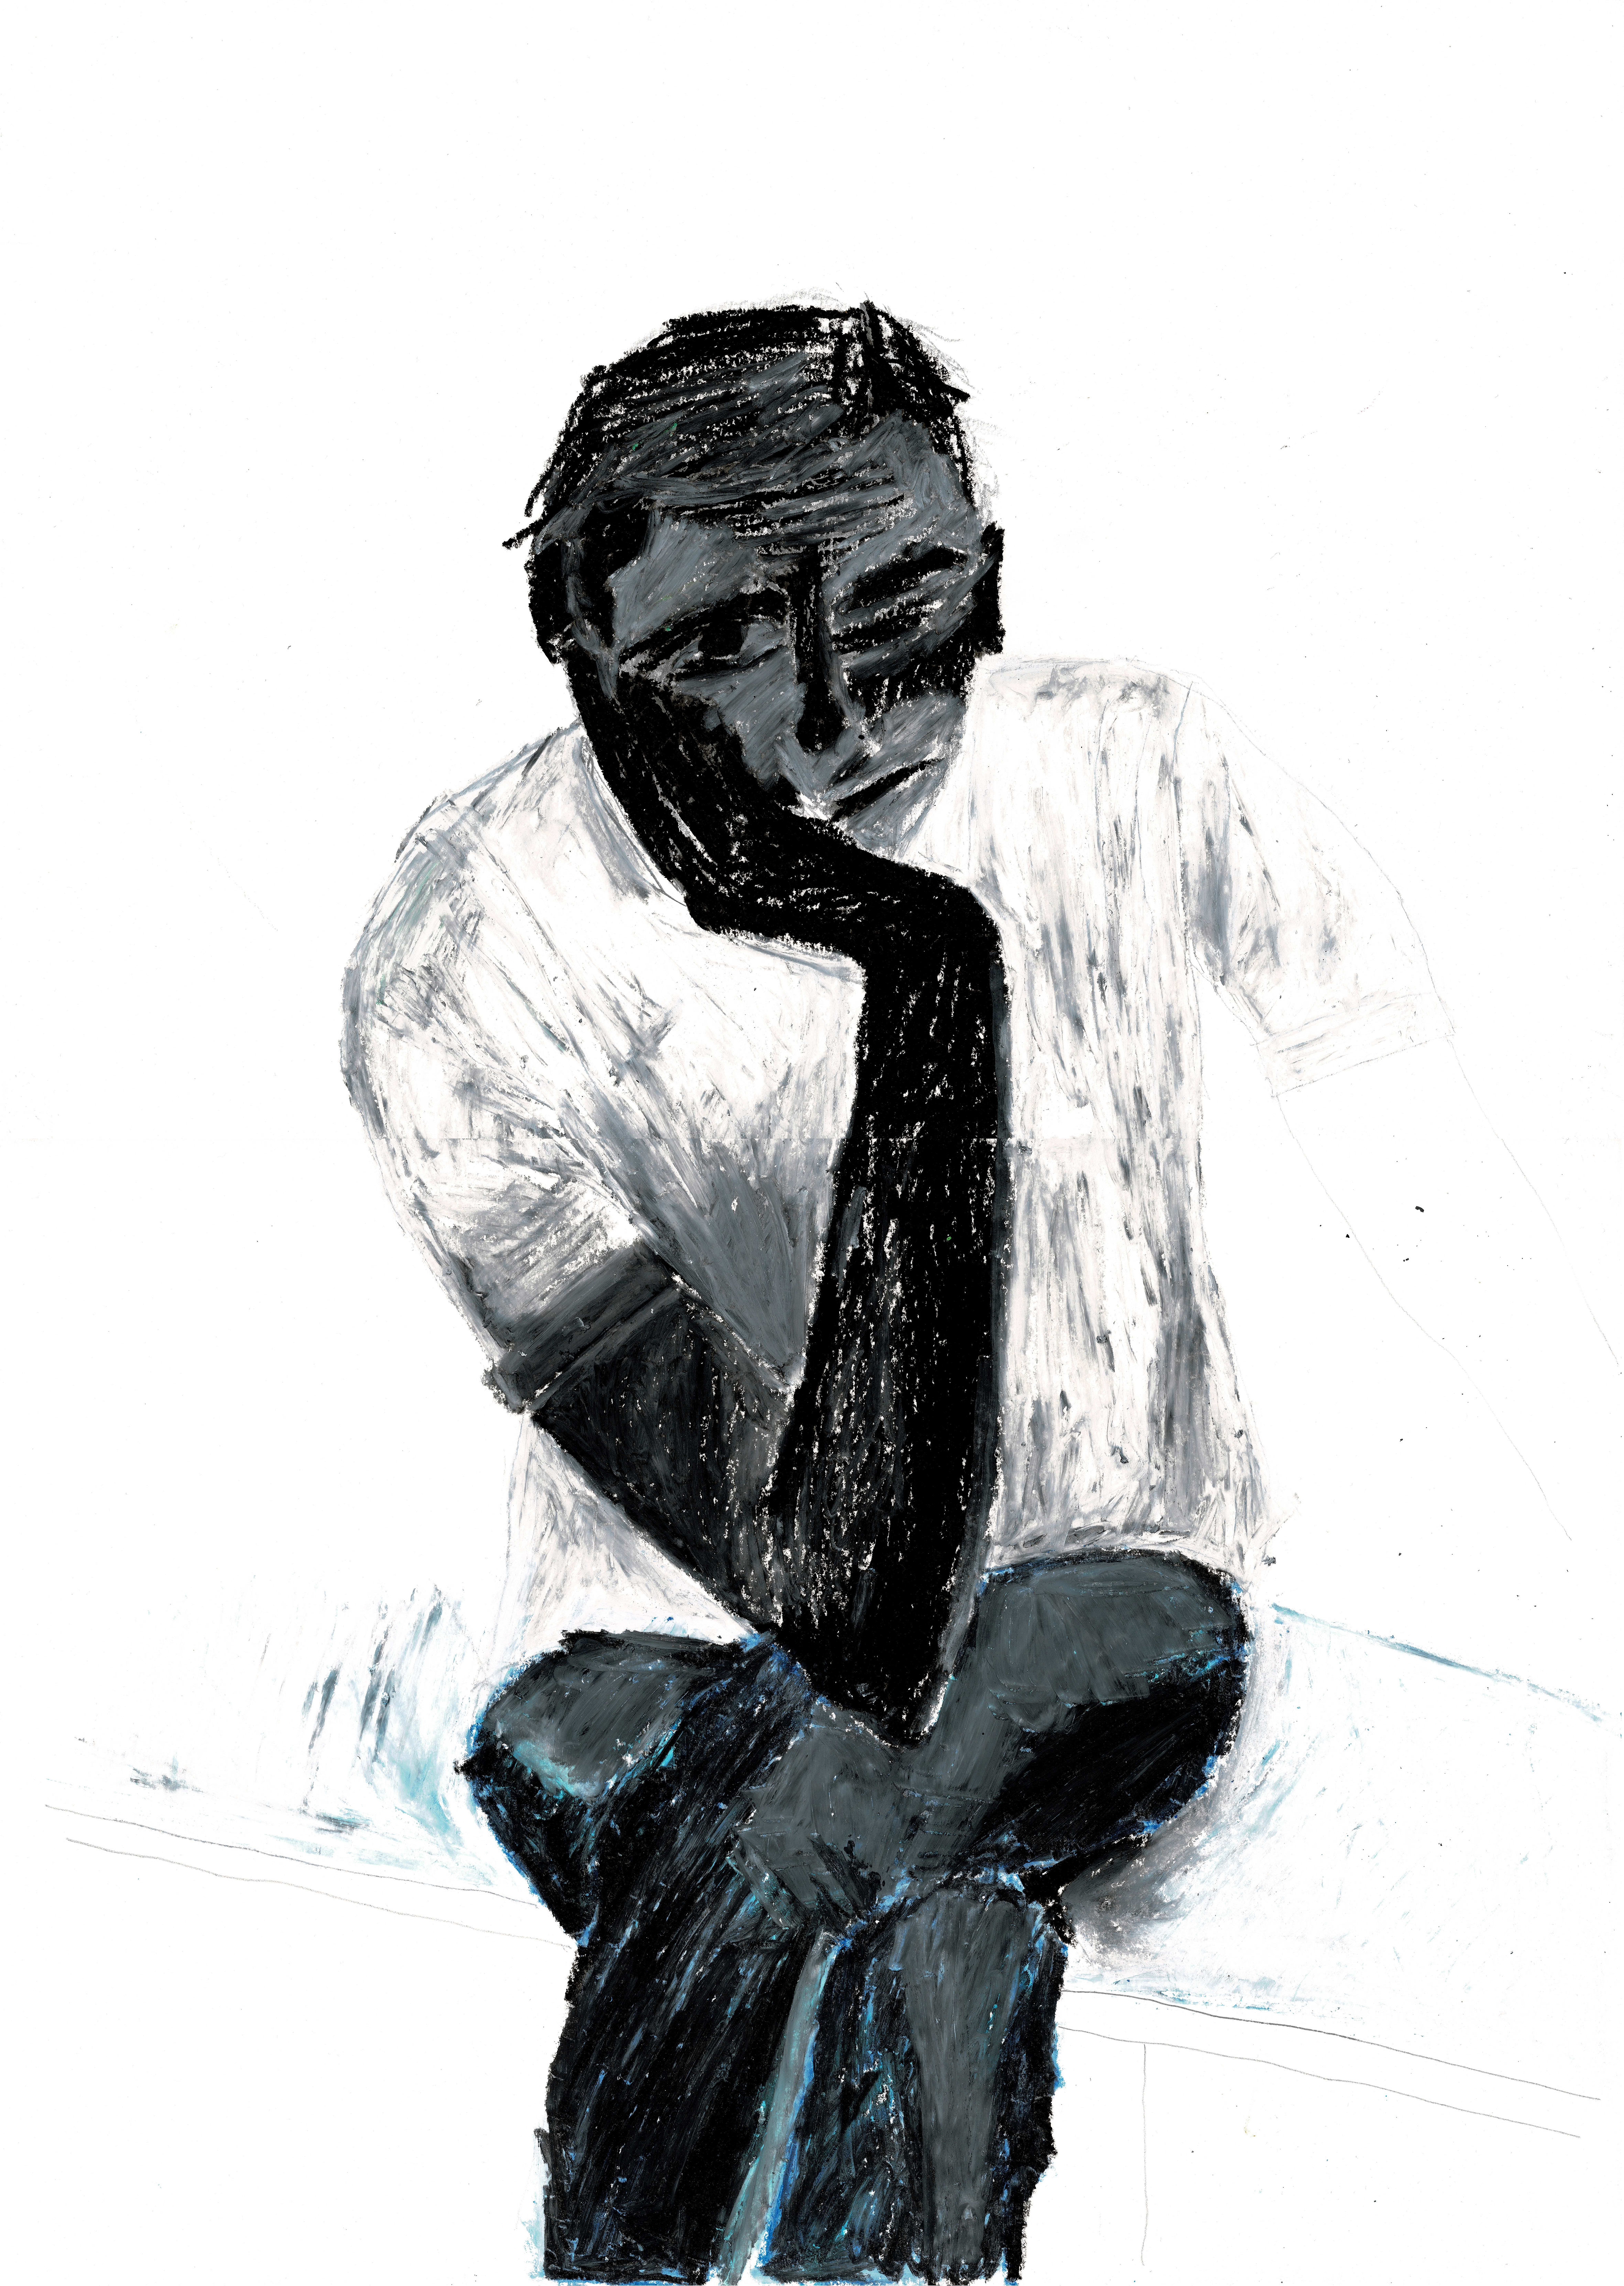 pastel drawing of a figure with black skin, a white t-shirt, and blue-flecked black pants with crossed legs leaning forward onto his arm